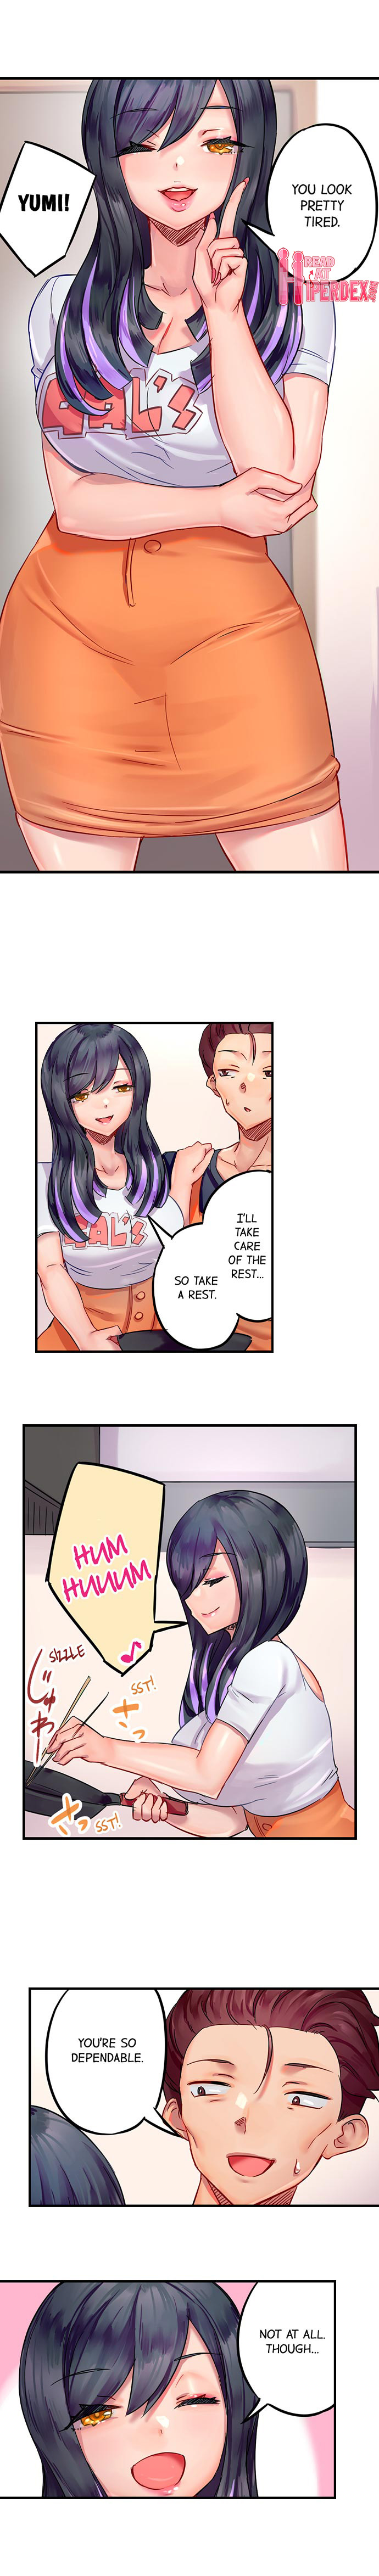 Orgasm Management for This Tanned Girl - Chapter 4 Page 6